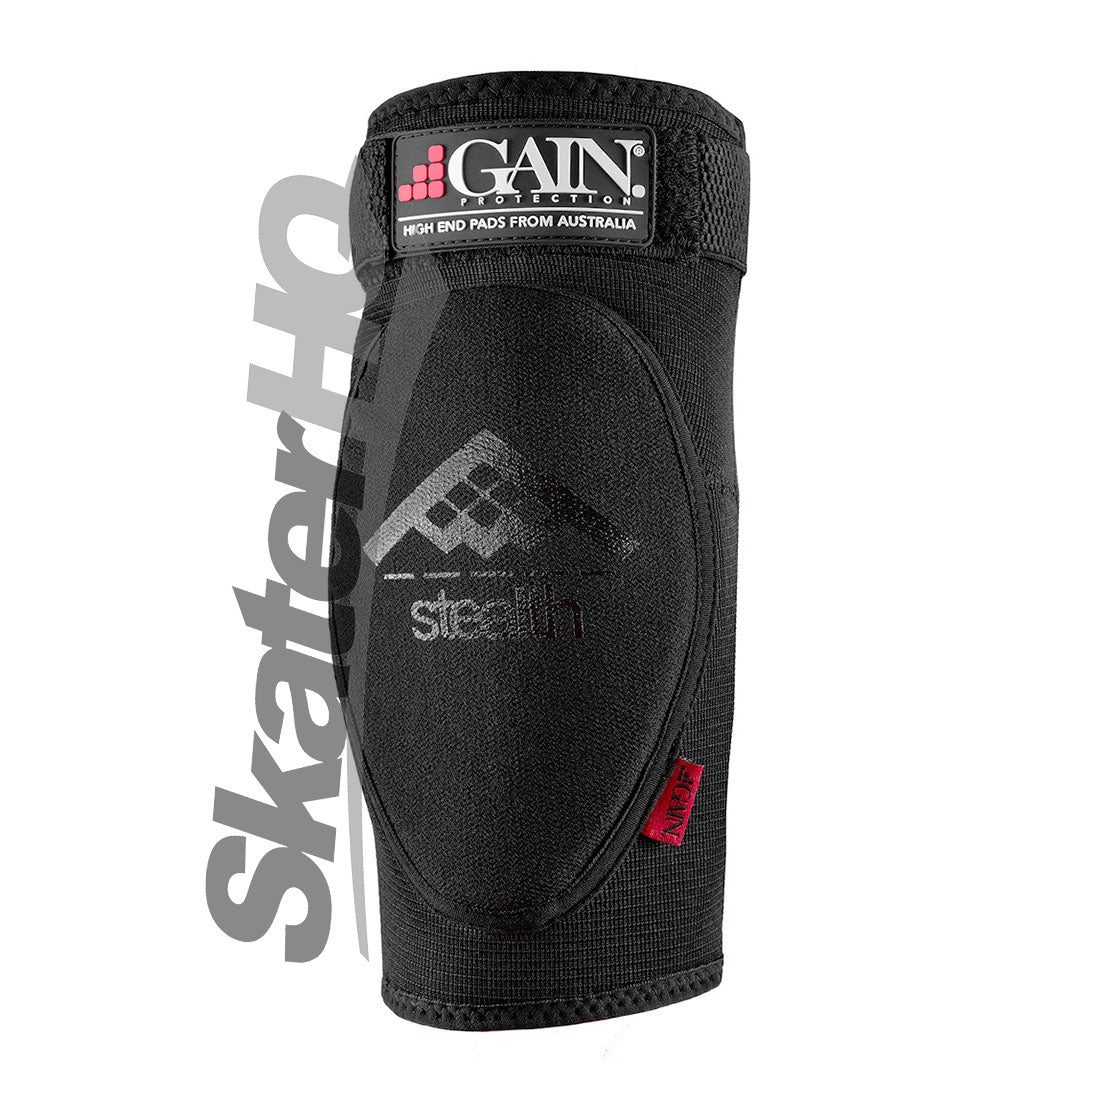 GAIN Stealth Elbow Pads - Black - M Protective Gear